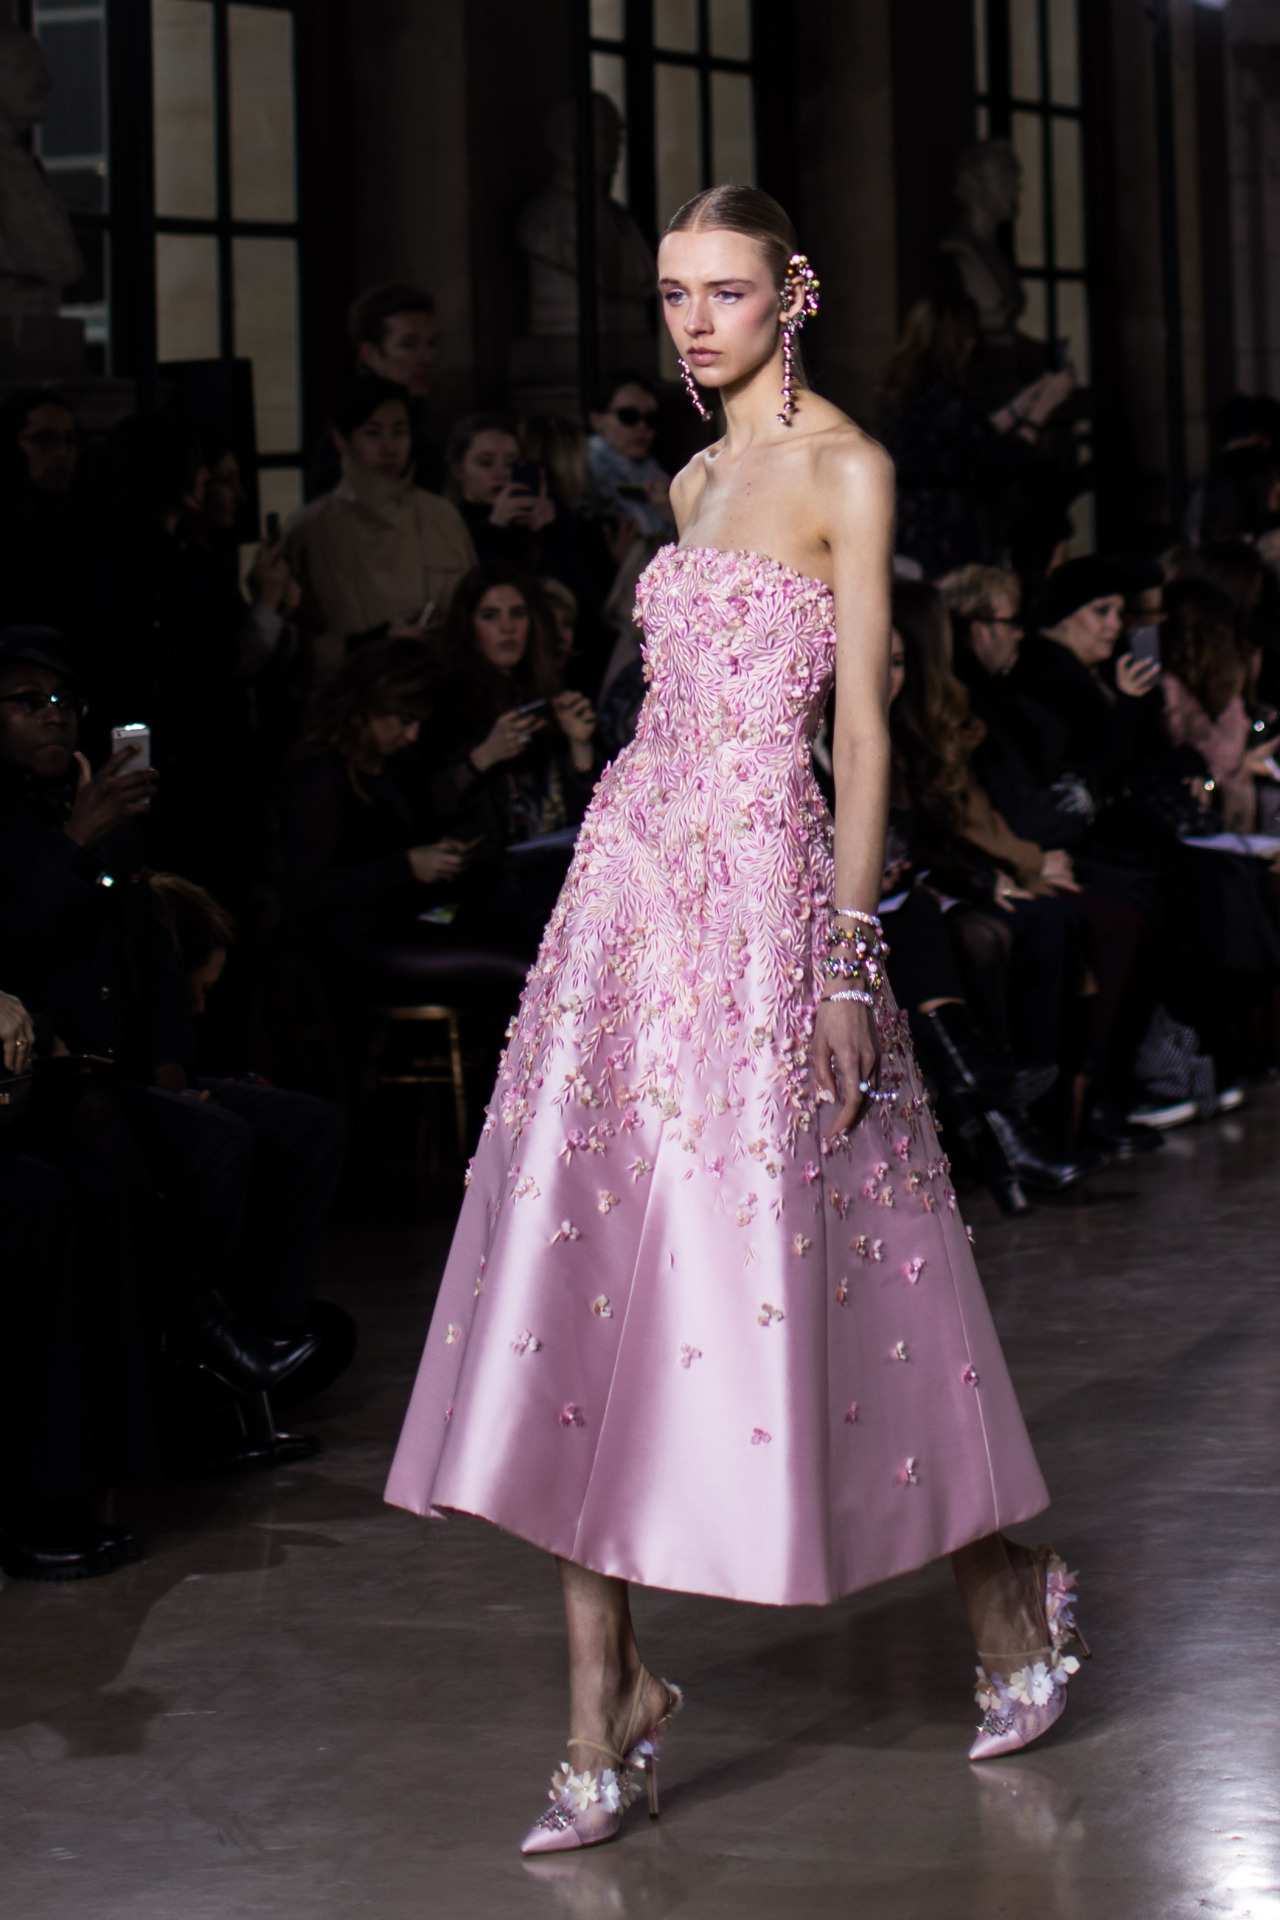 GEORGES HOBEIKA SS 2017 Paris Couture Week... | (re)fashion gallery